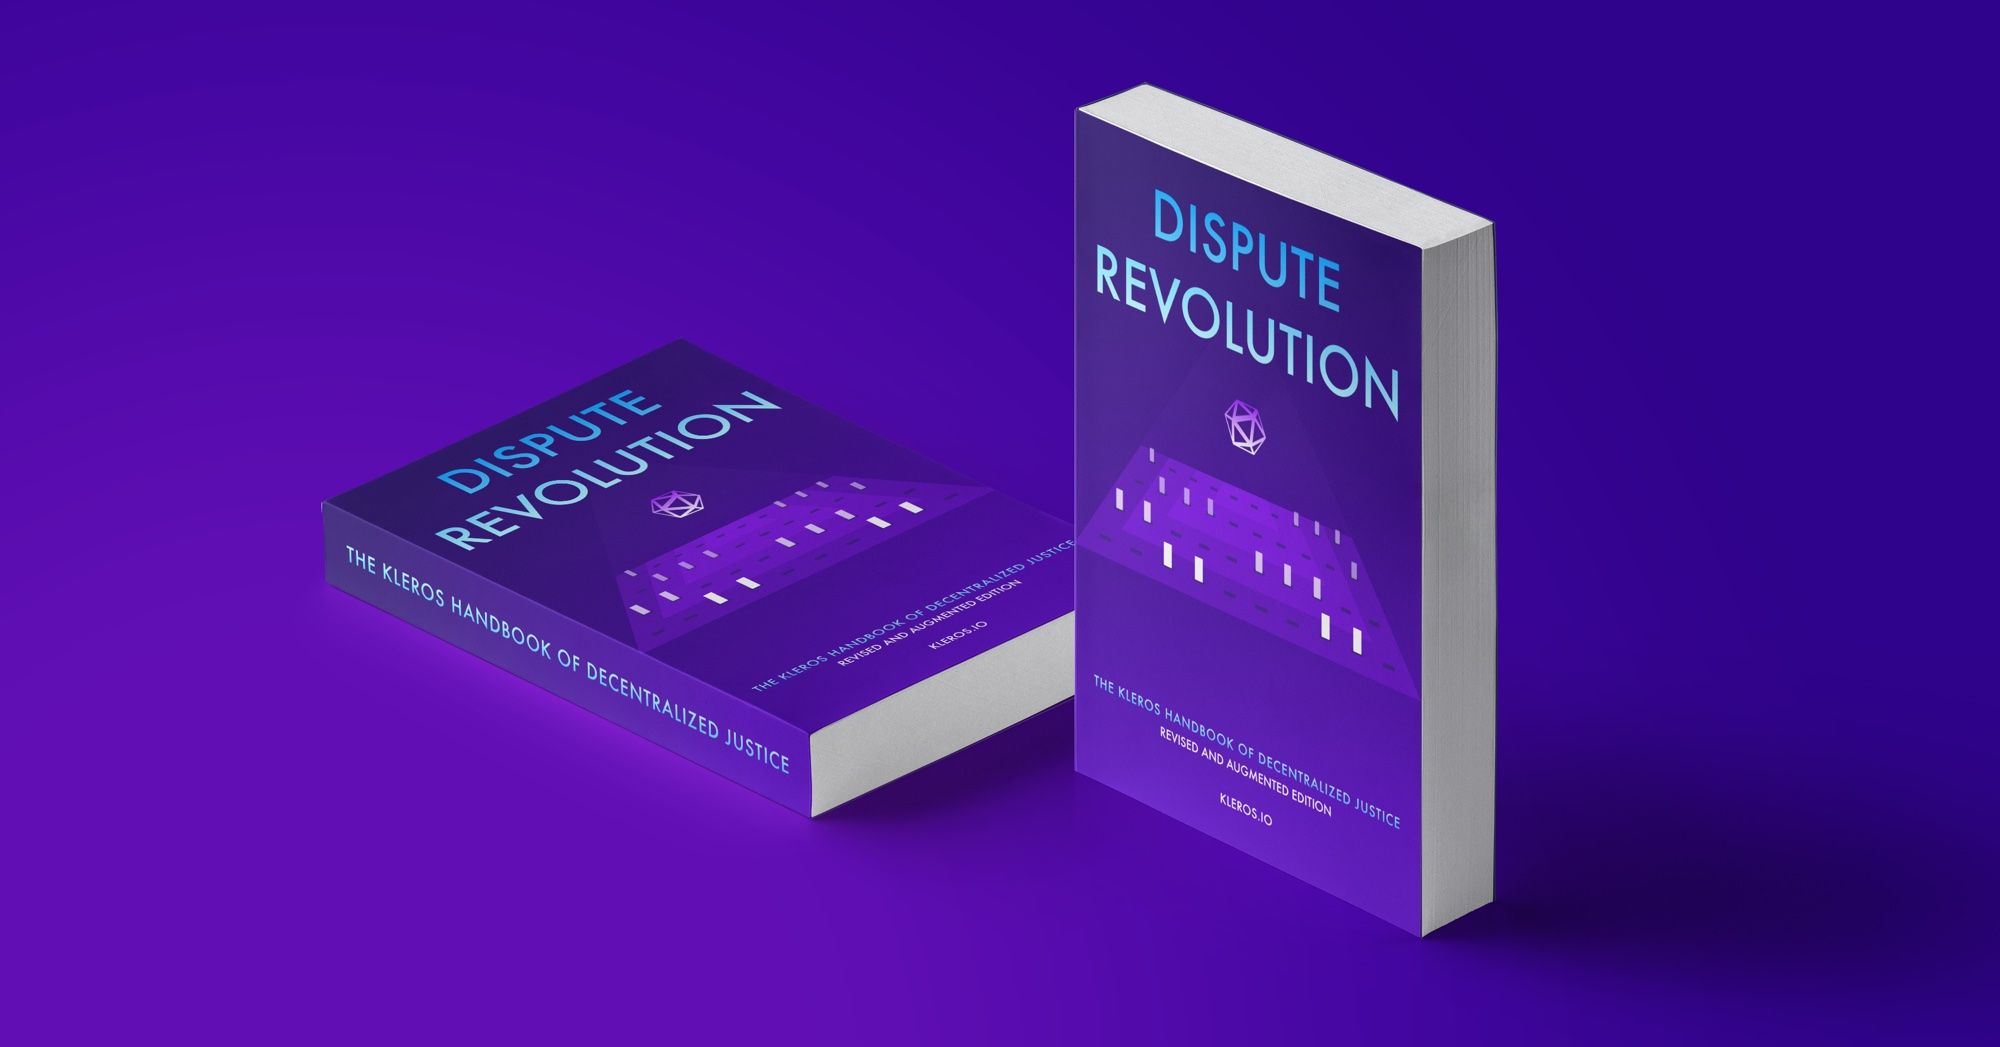 Launching Dispute Revolution: Revised and Augmented Edition